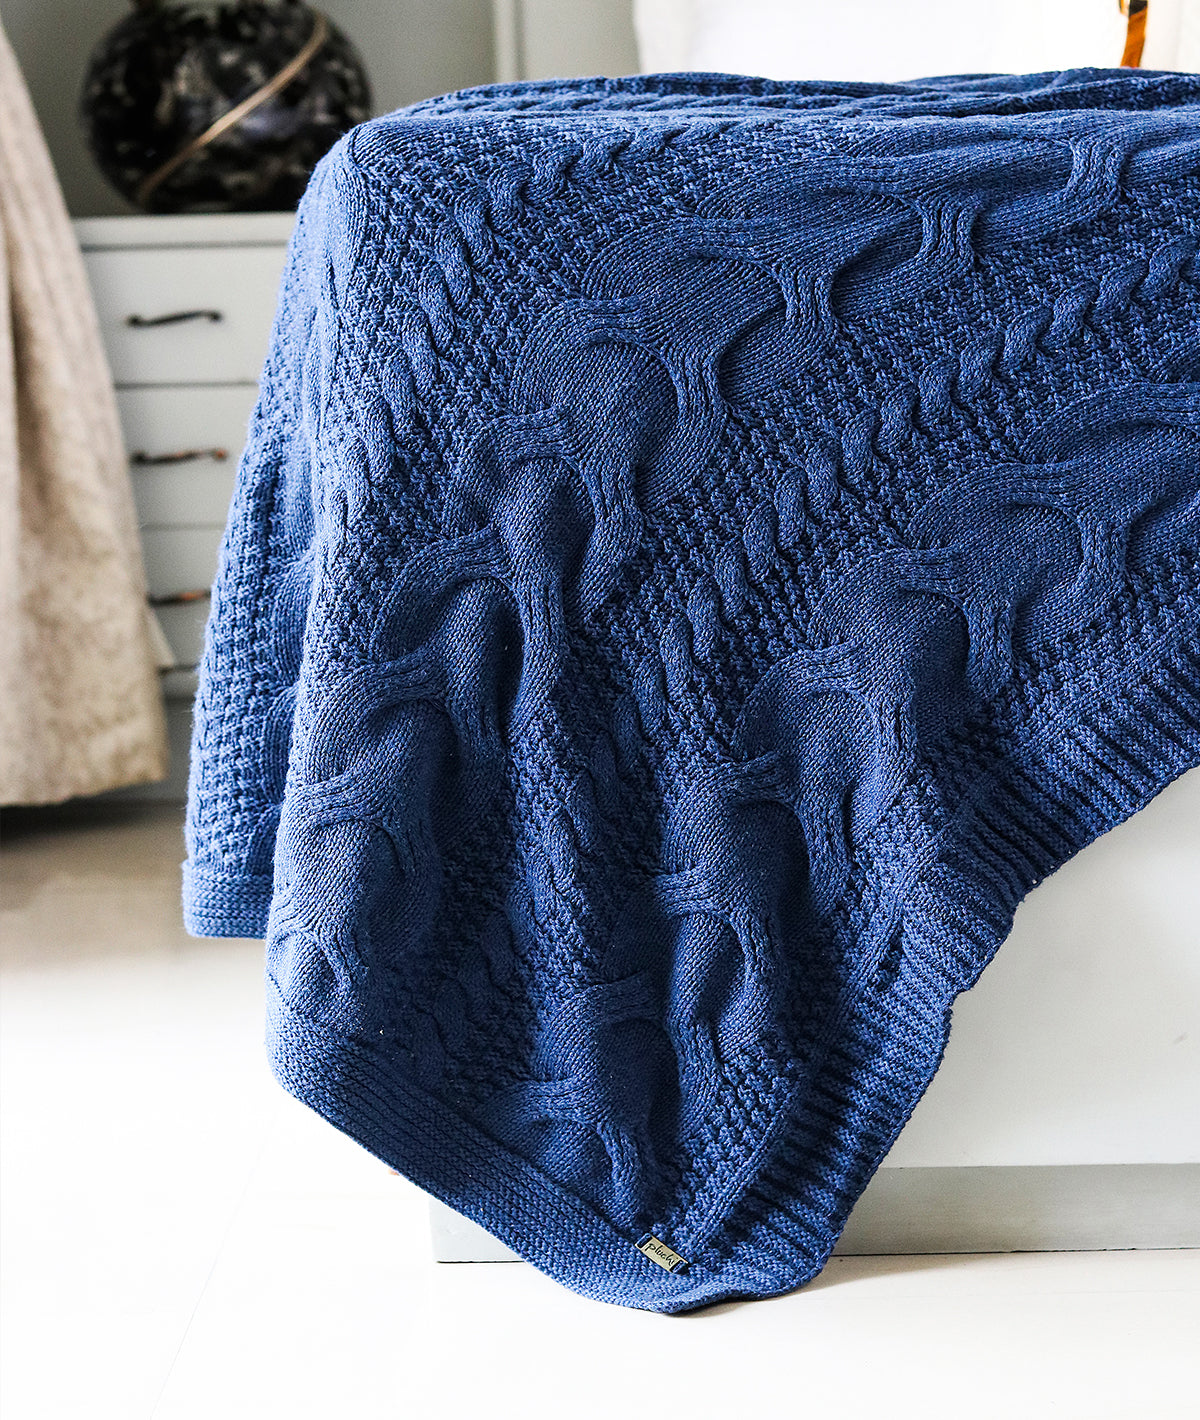 Classical Throw Navy Melange 100% Cotton Knitted All Season AC Throw Blanket